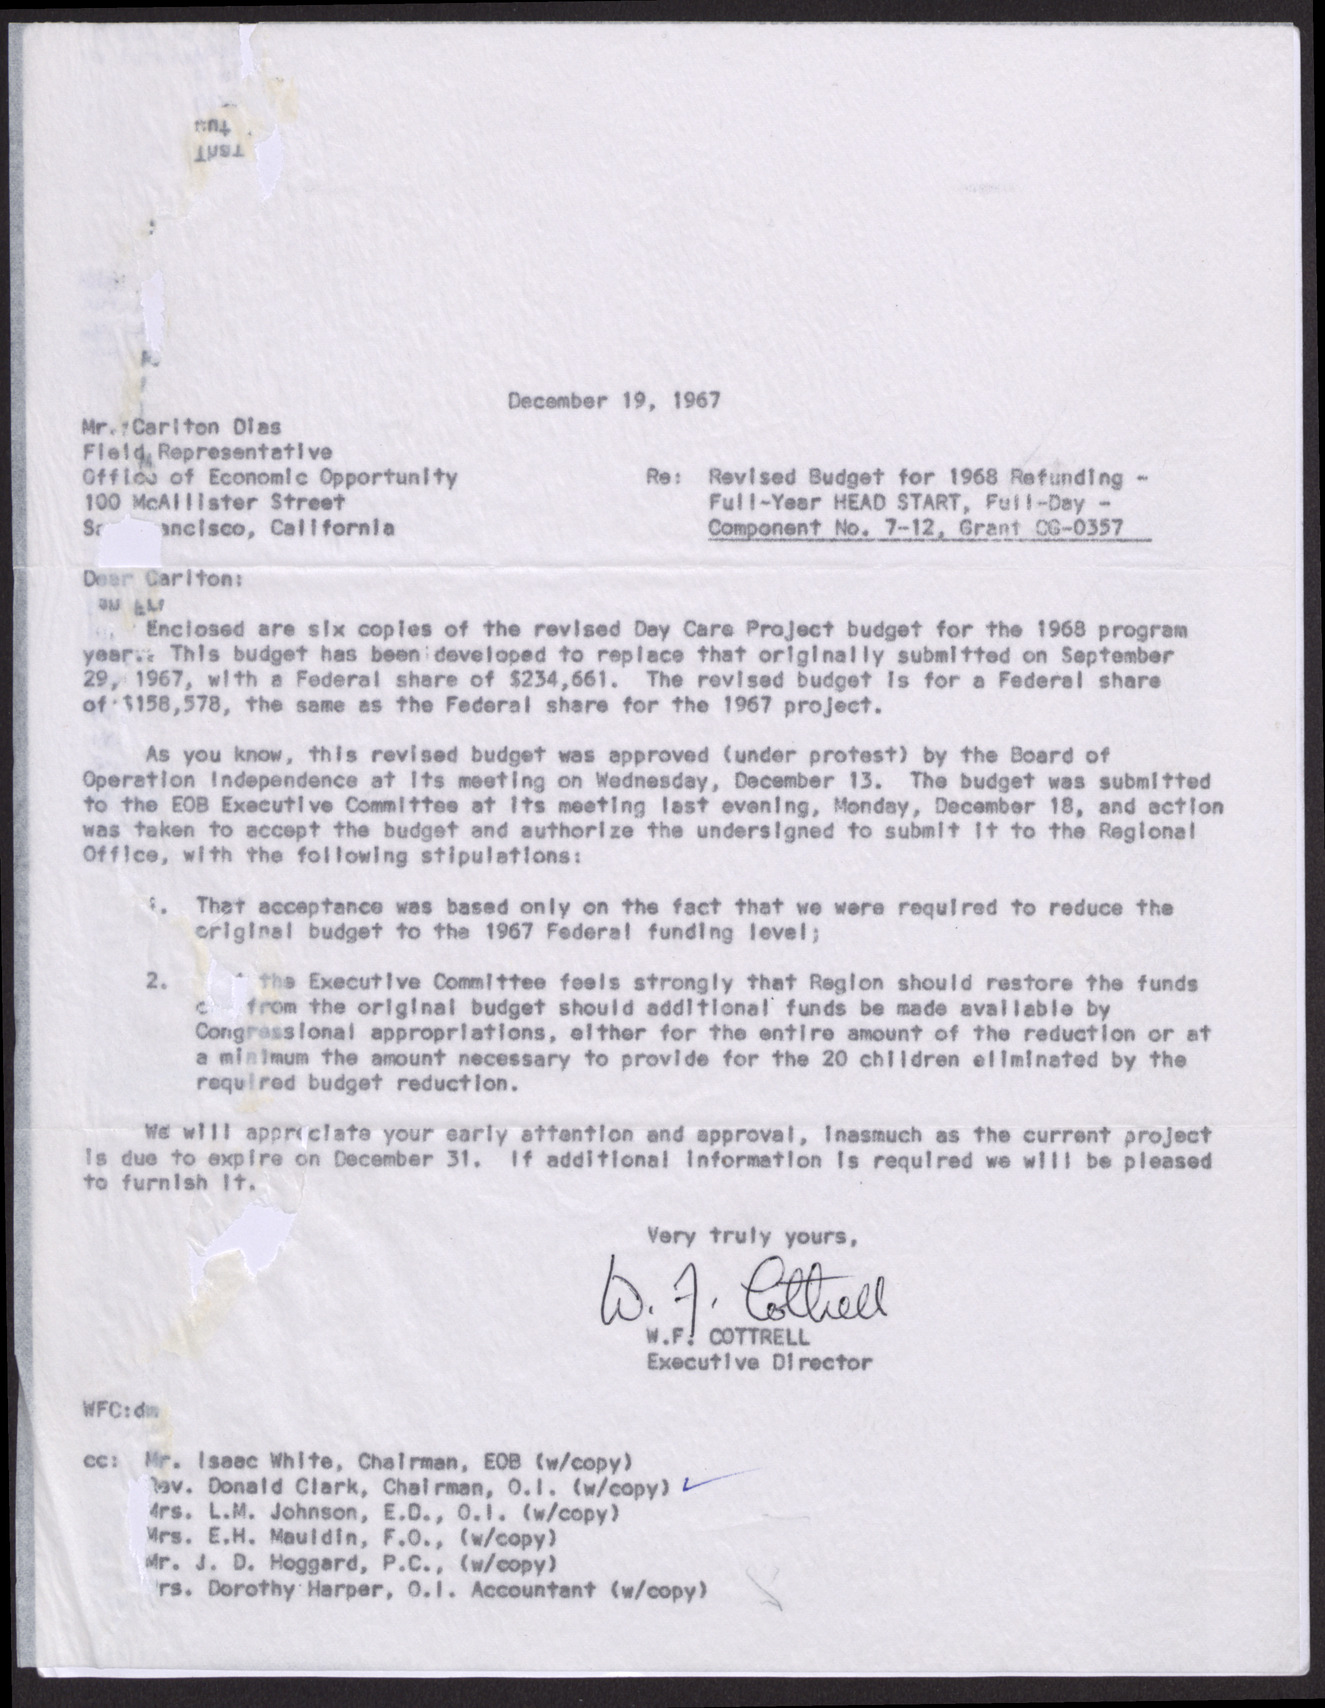 Letter to Mr. Carlton Dias from W. F. Cottrell, December 19, 1967